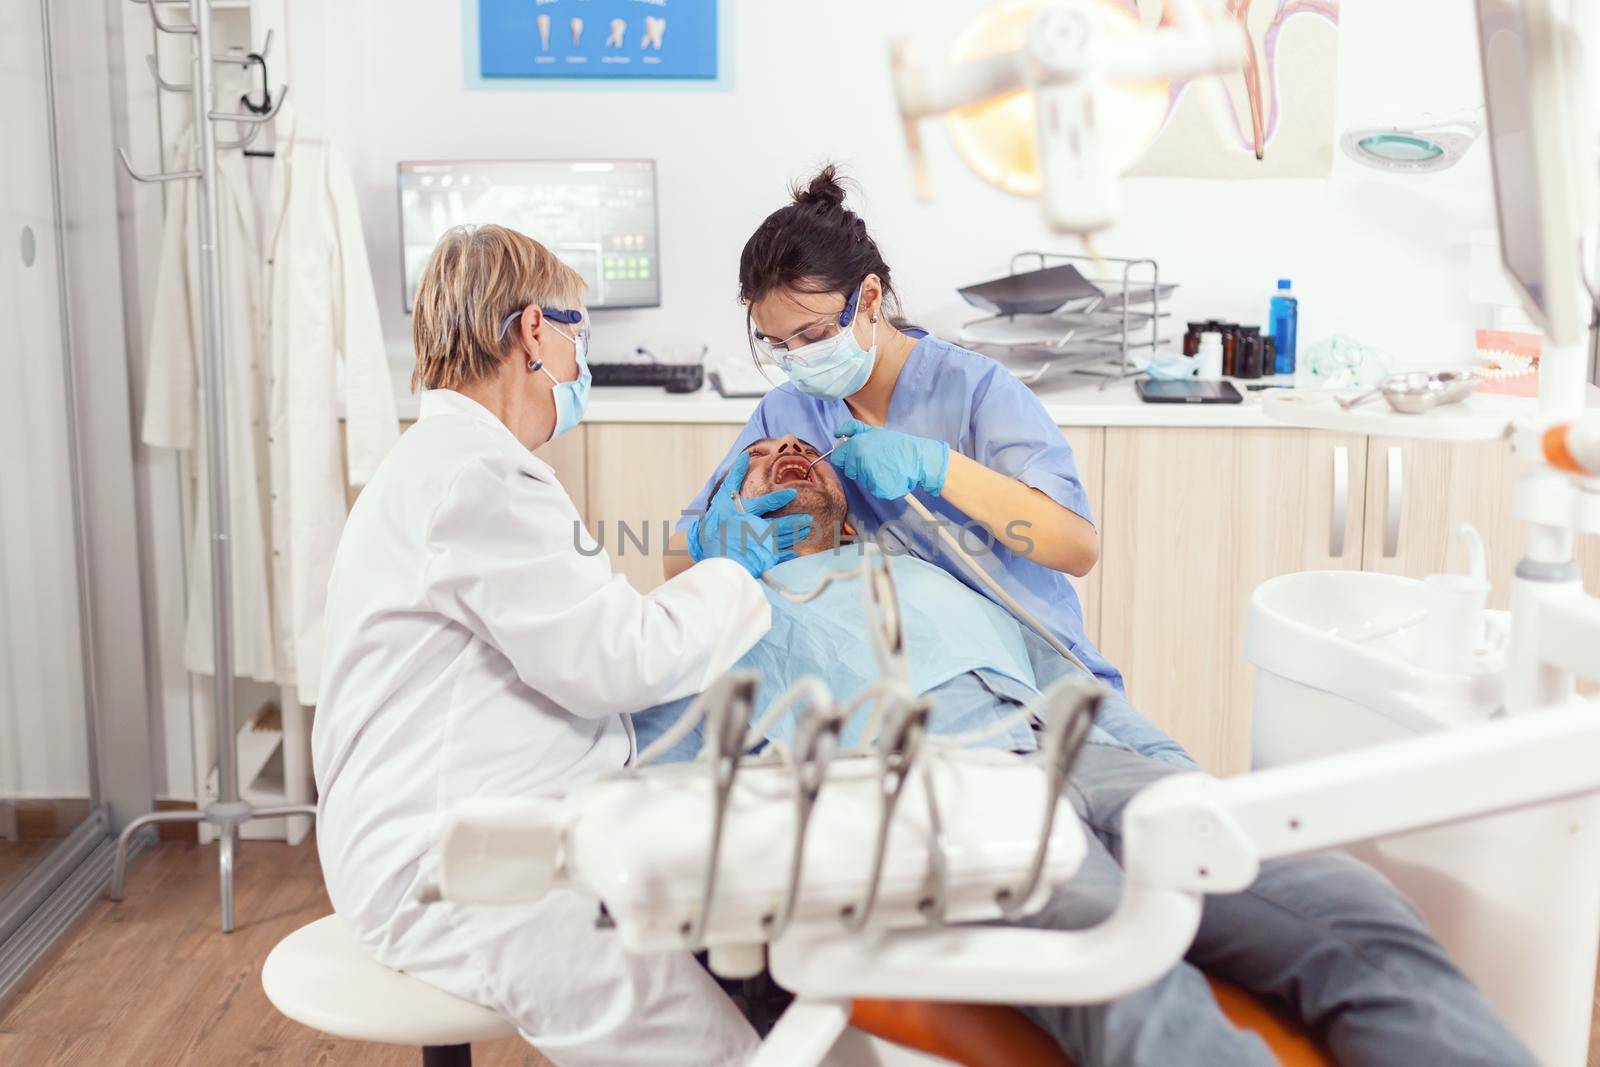 Sick patient sitting on stomatology chair while medical nurse looking into mouth by DCStudio